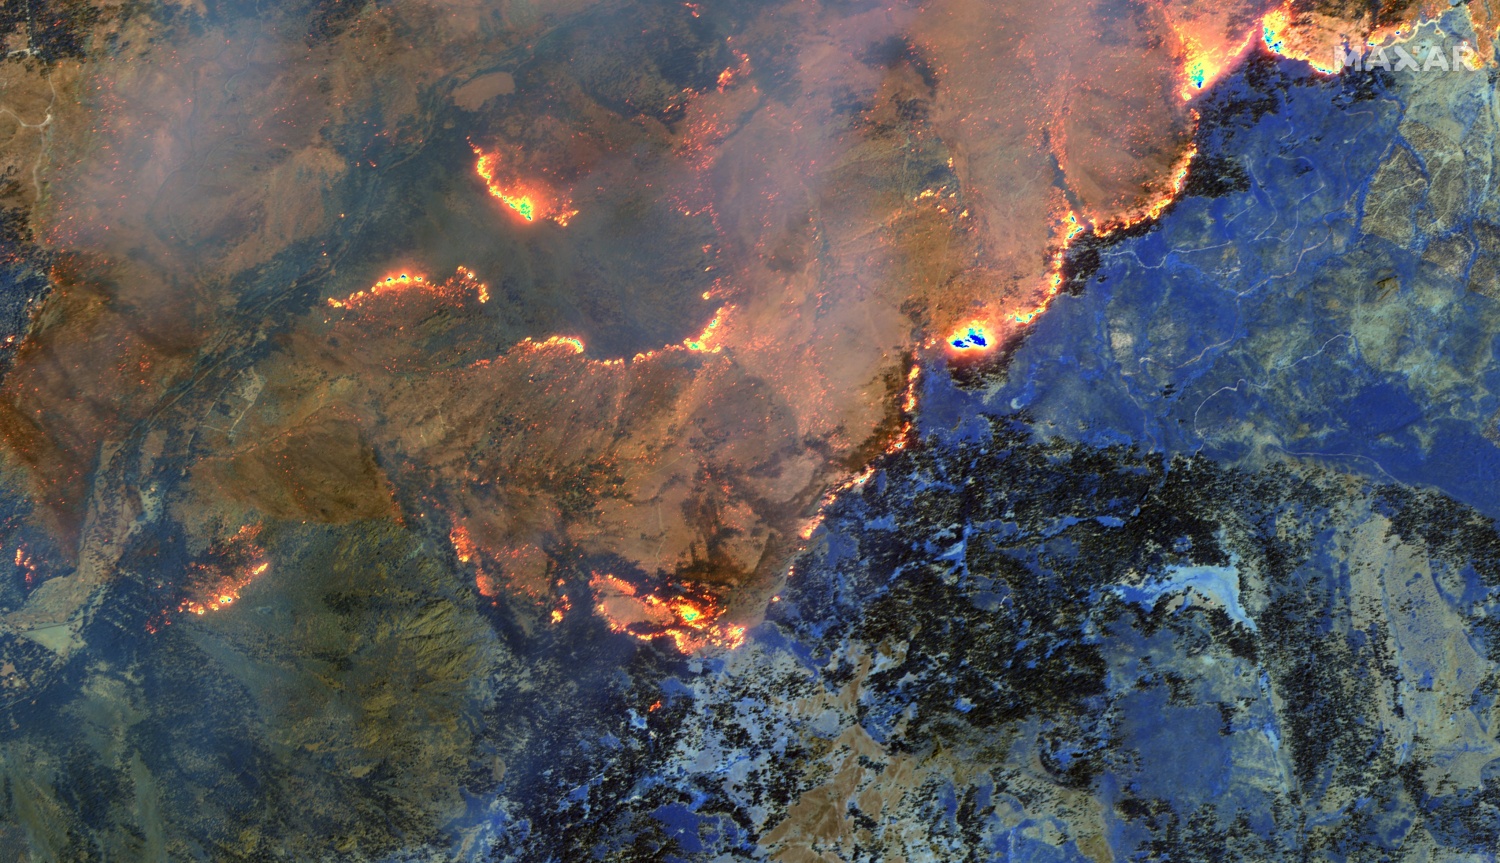 Infrared Satellite Imagery of the Dixie Fire in Greenville, California